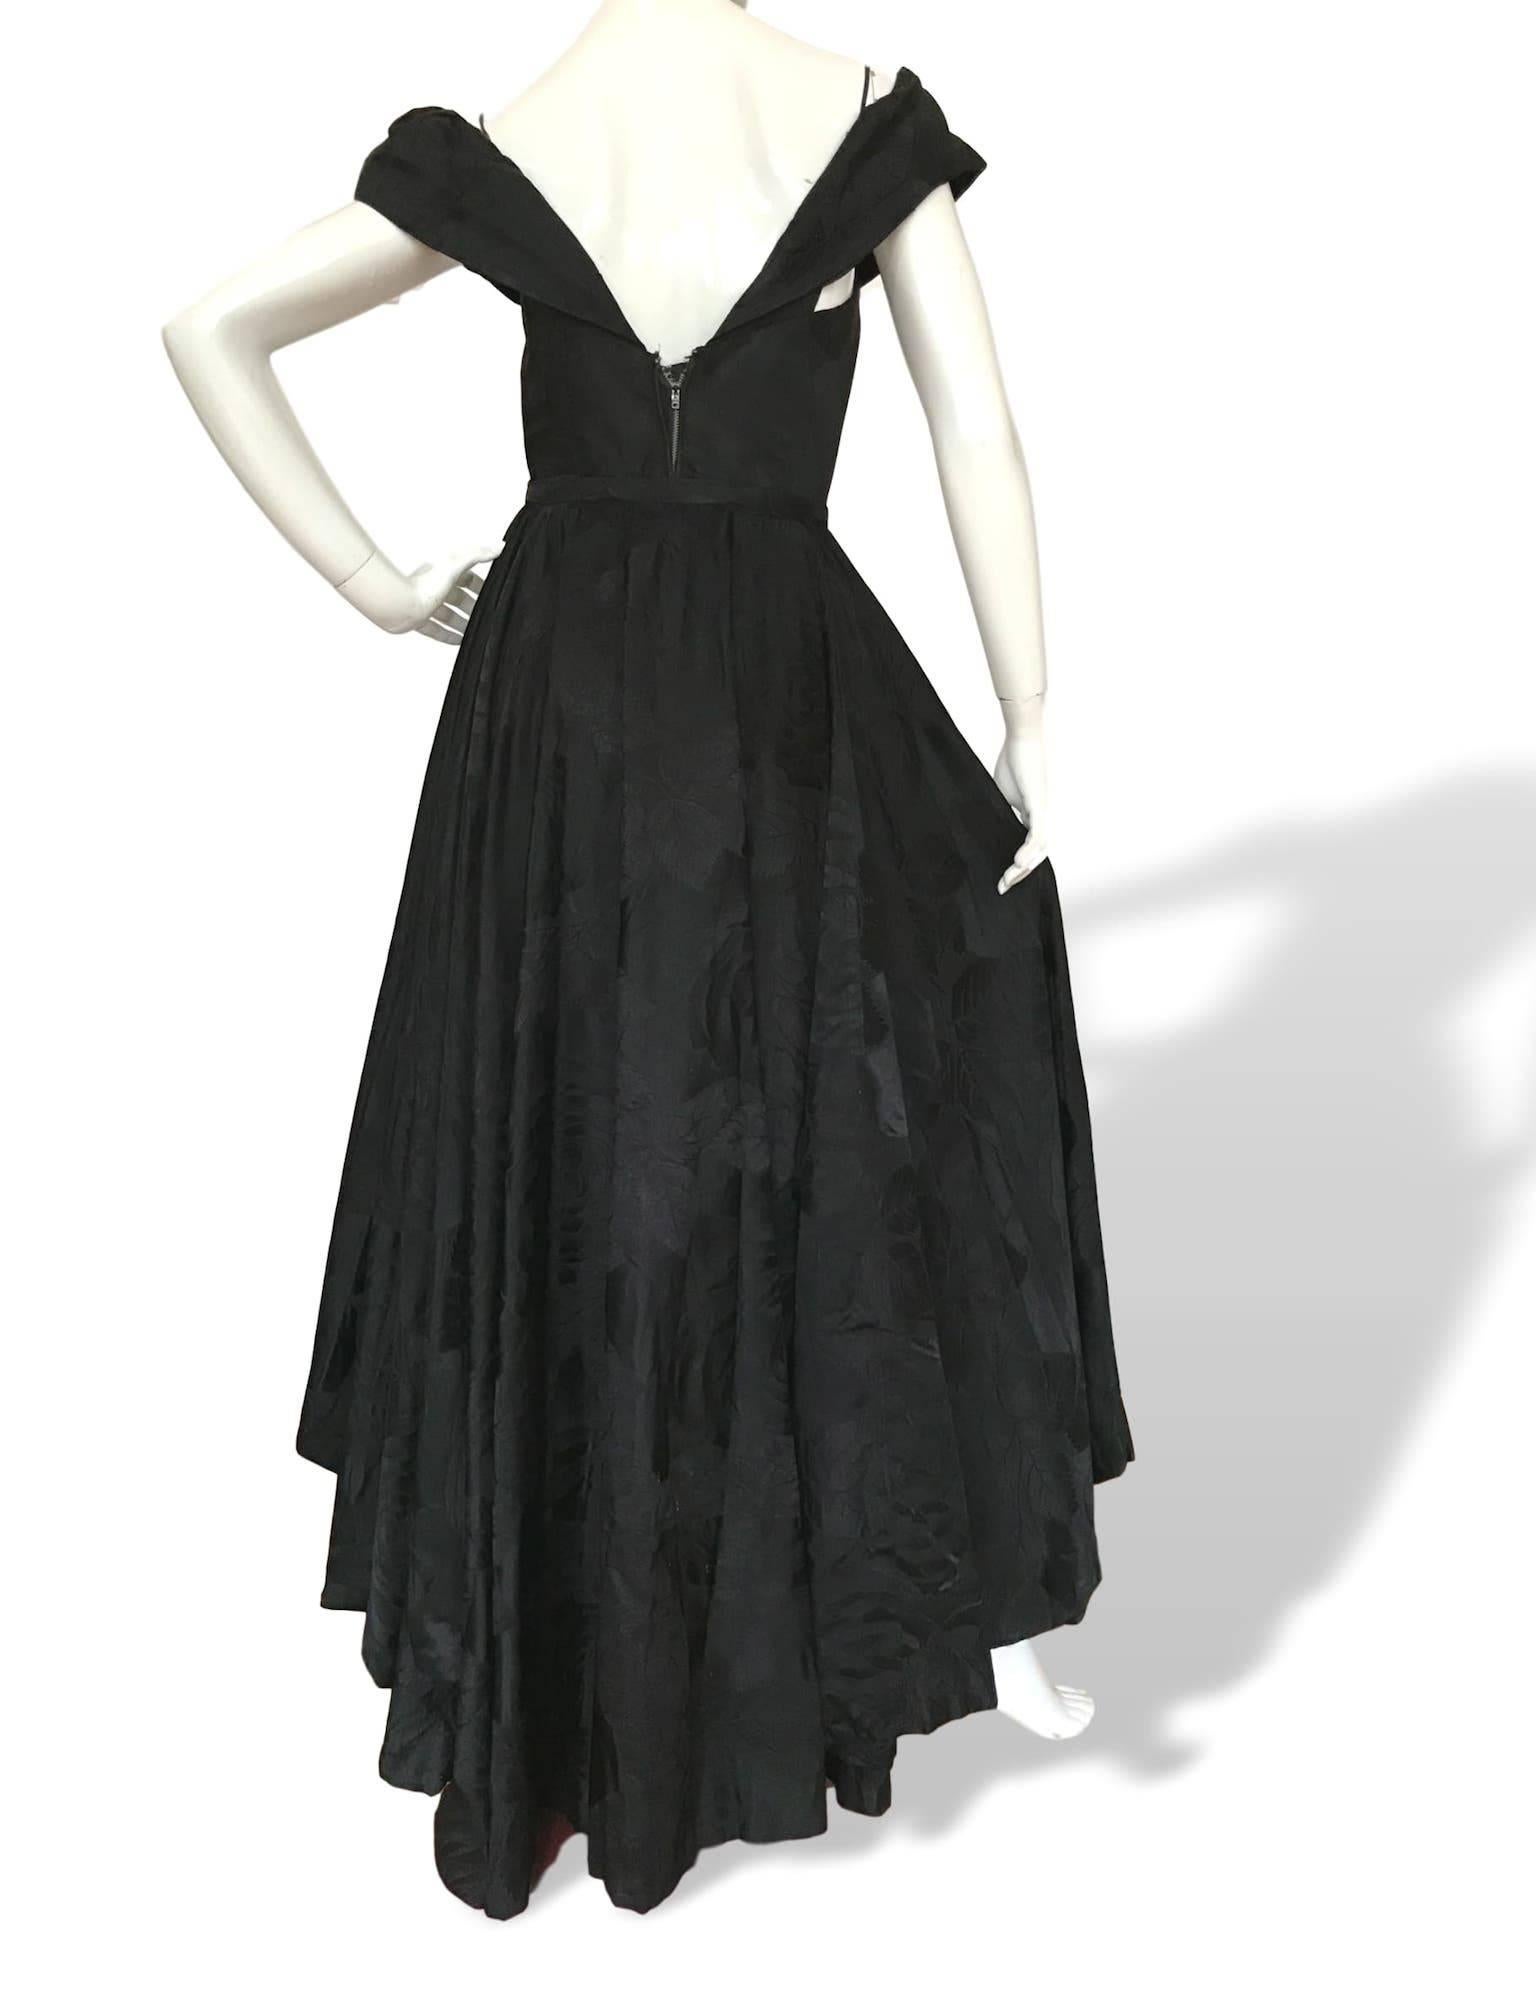 Couture Standard Vintage 1950s Black Leafy Satin Damask Cocktail 2 Way Dress In Excellent Condition For Sale In Portsmouth, Hampshire